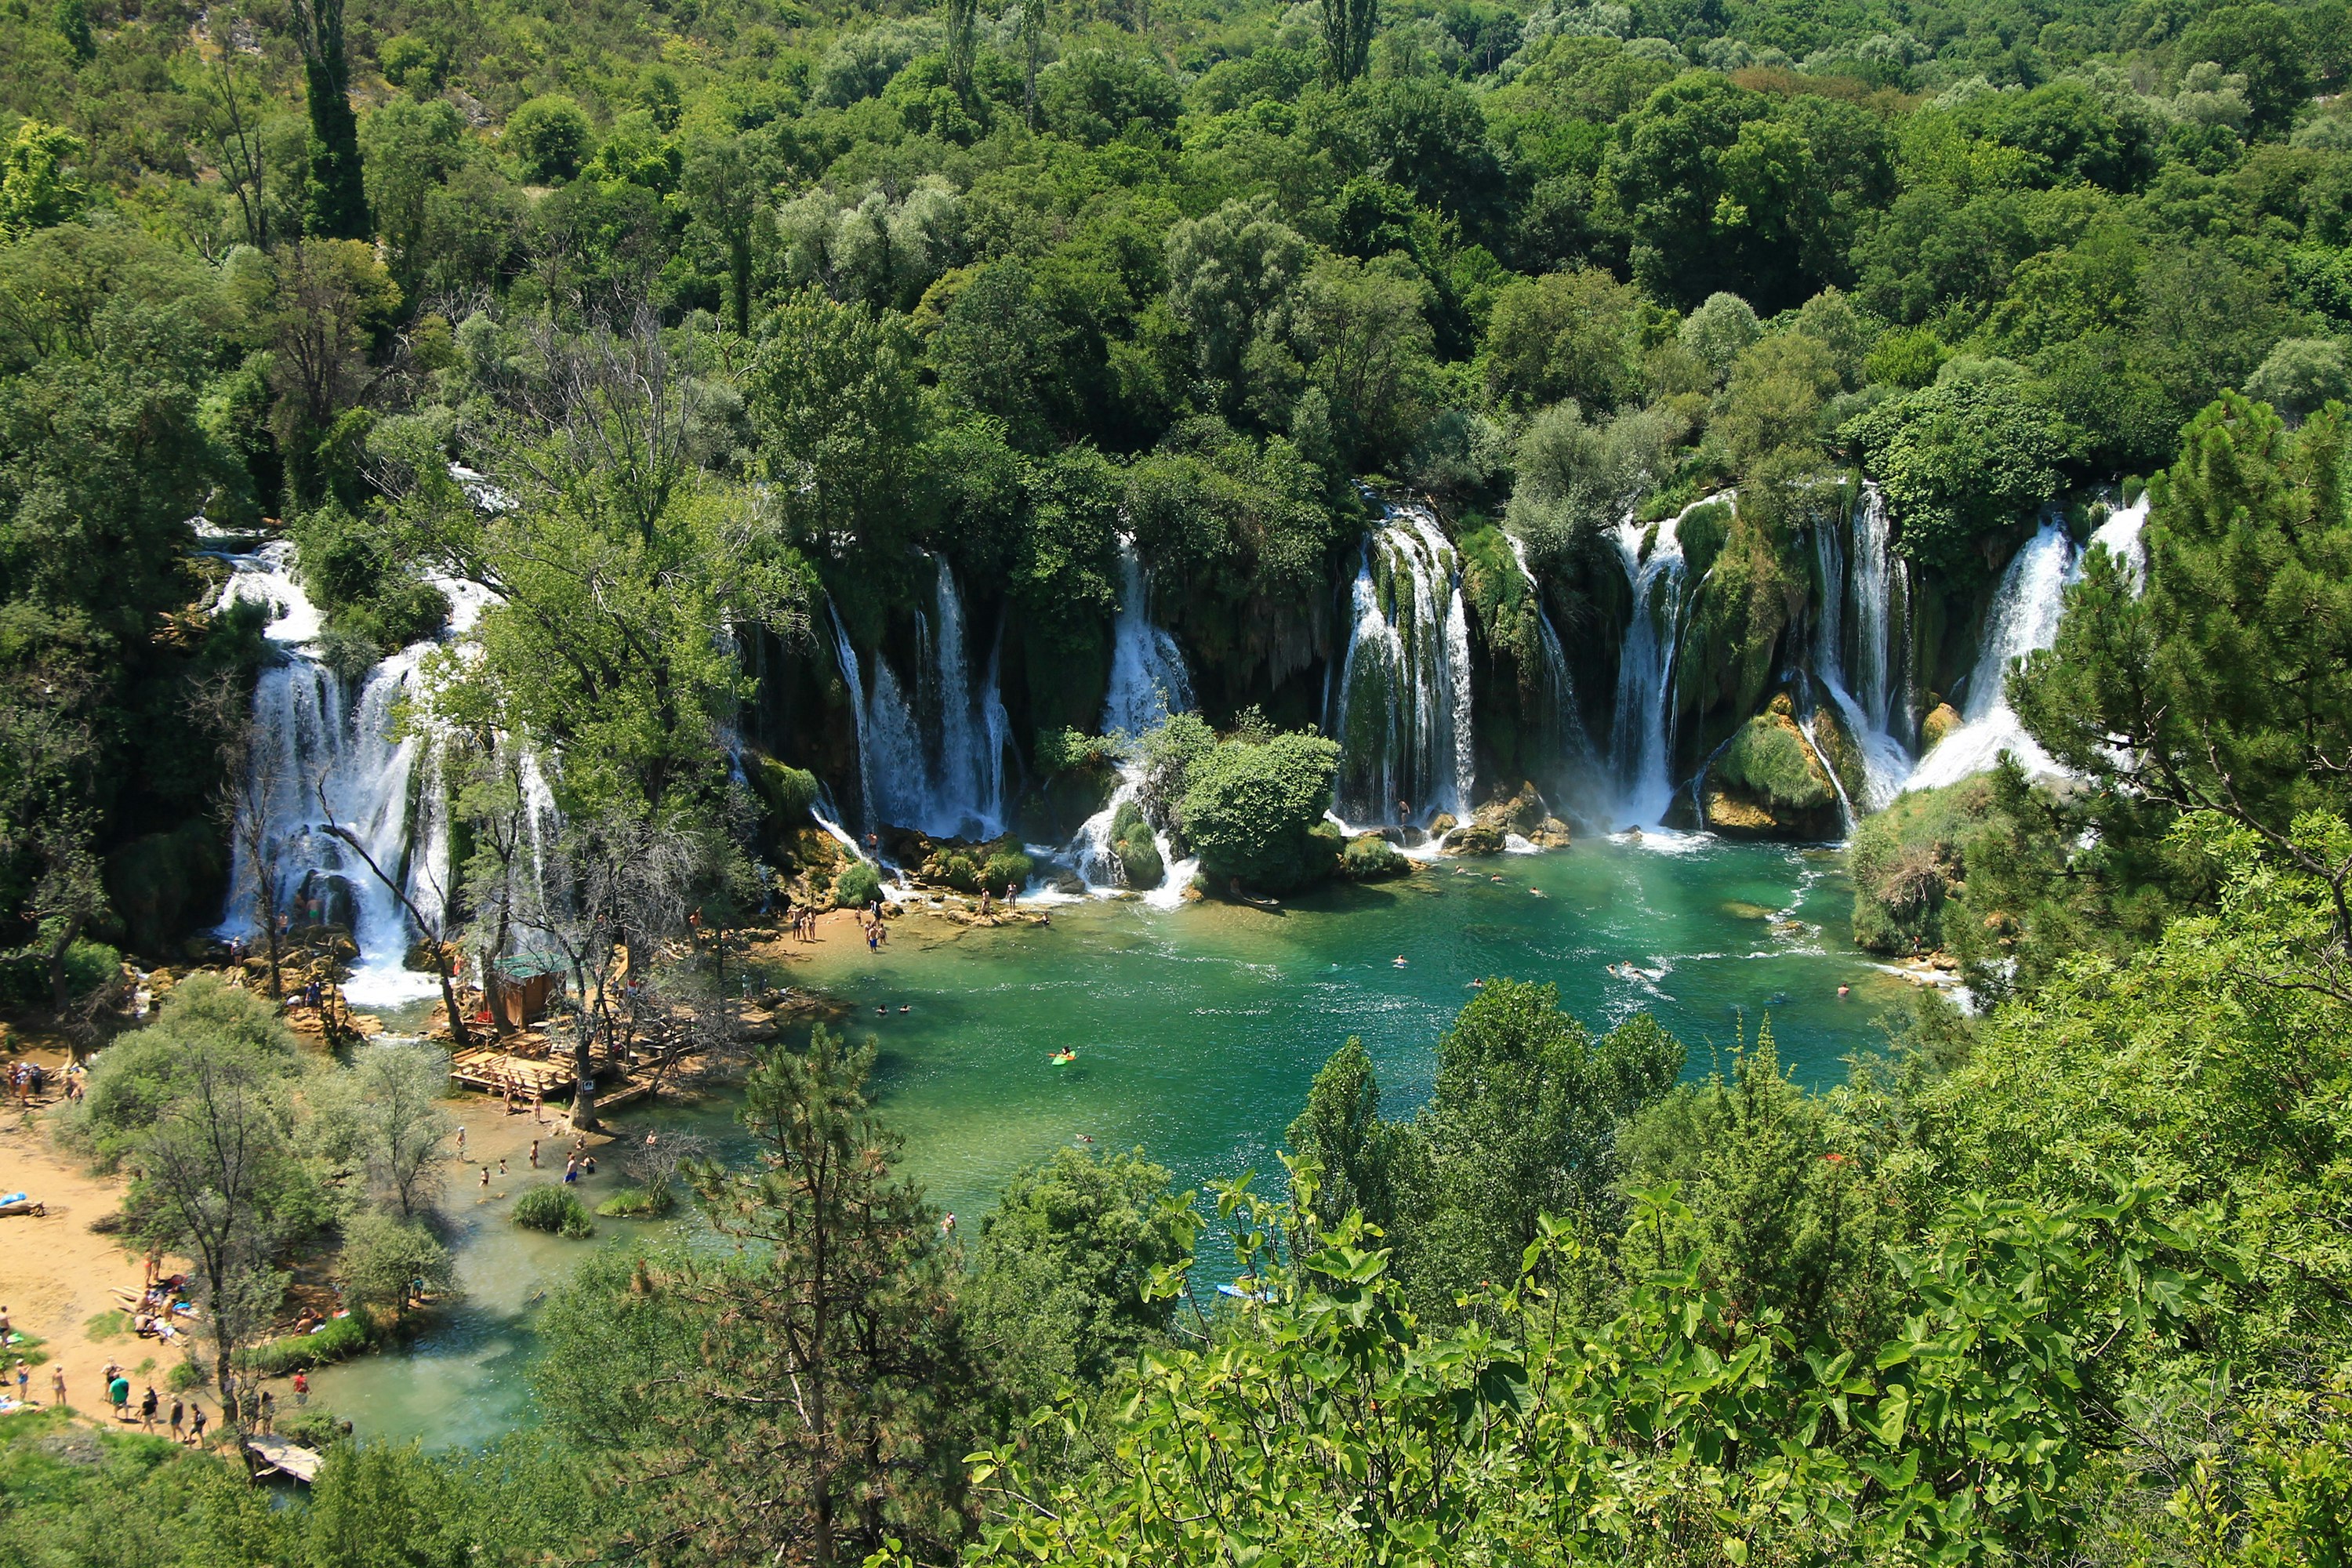 A series of waterfalls flow out of dense forest into a green-blue pool. A few people can be seen on the beach to the left.